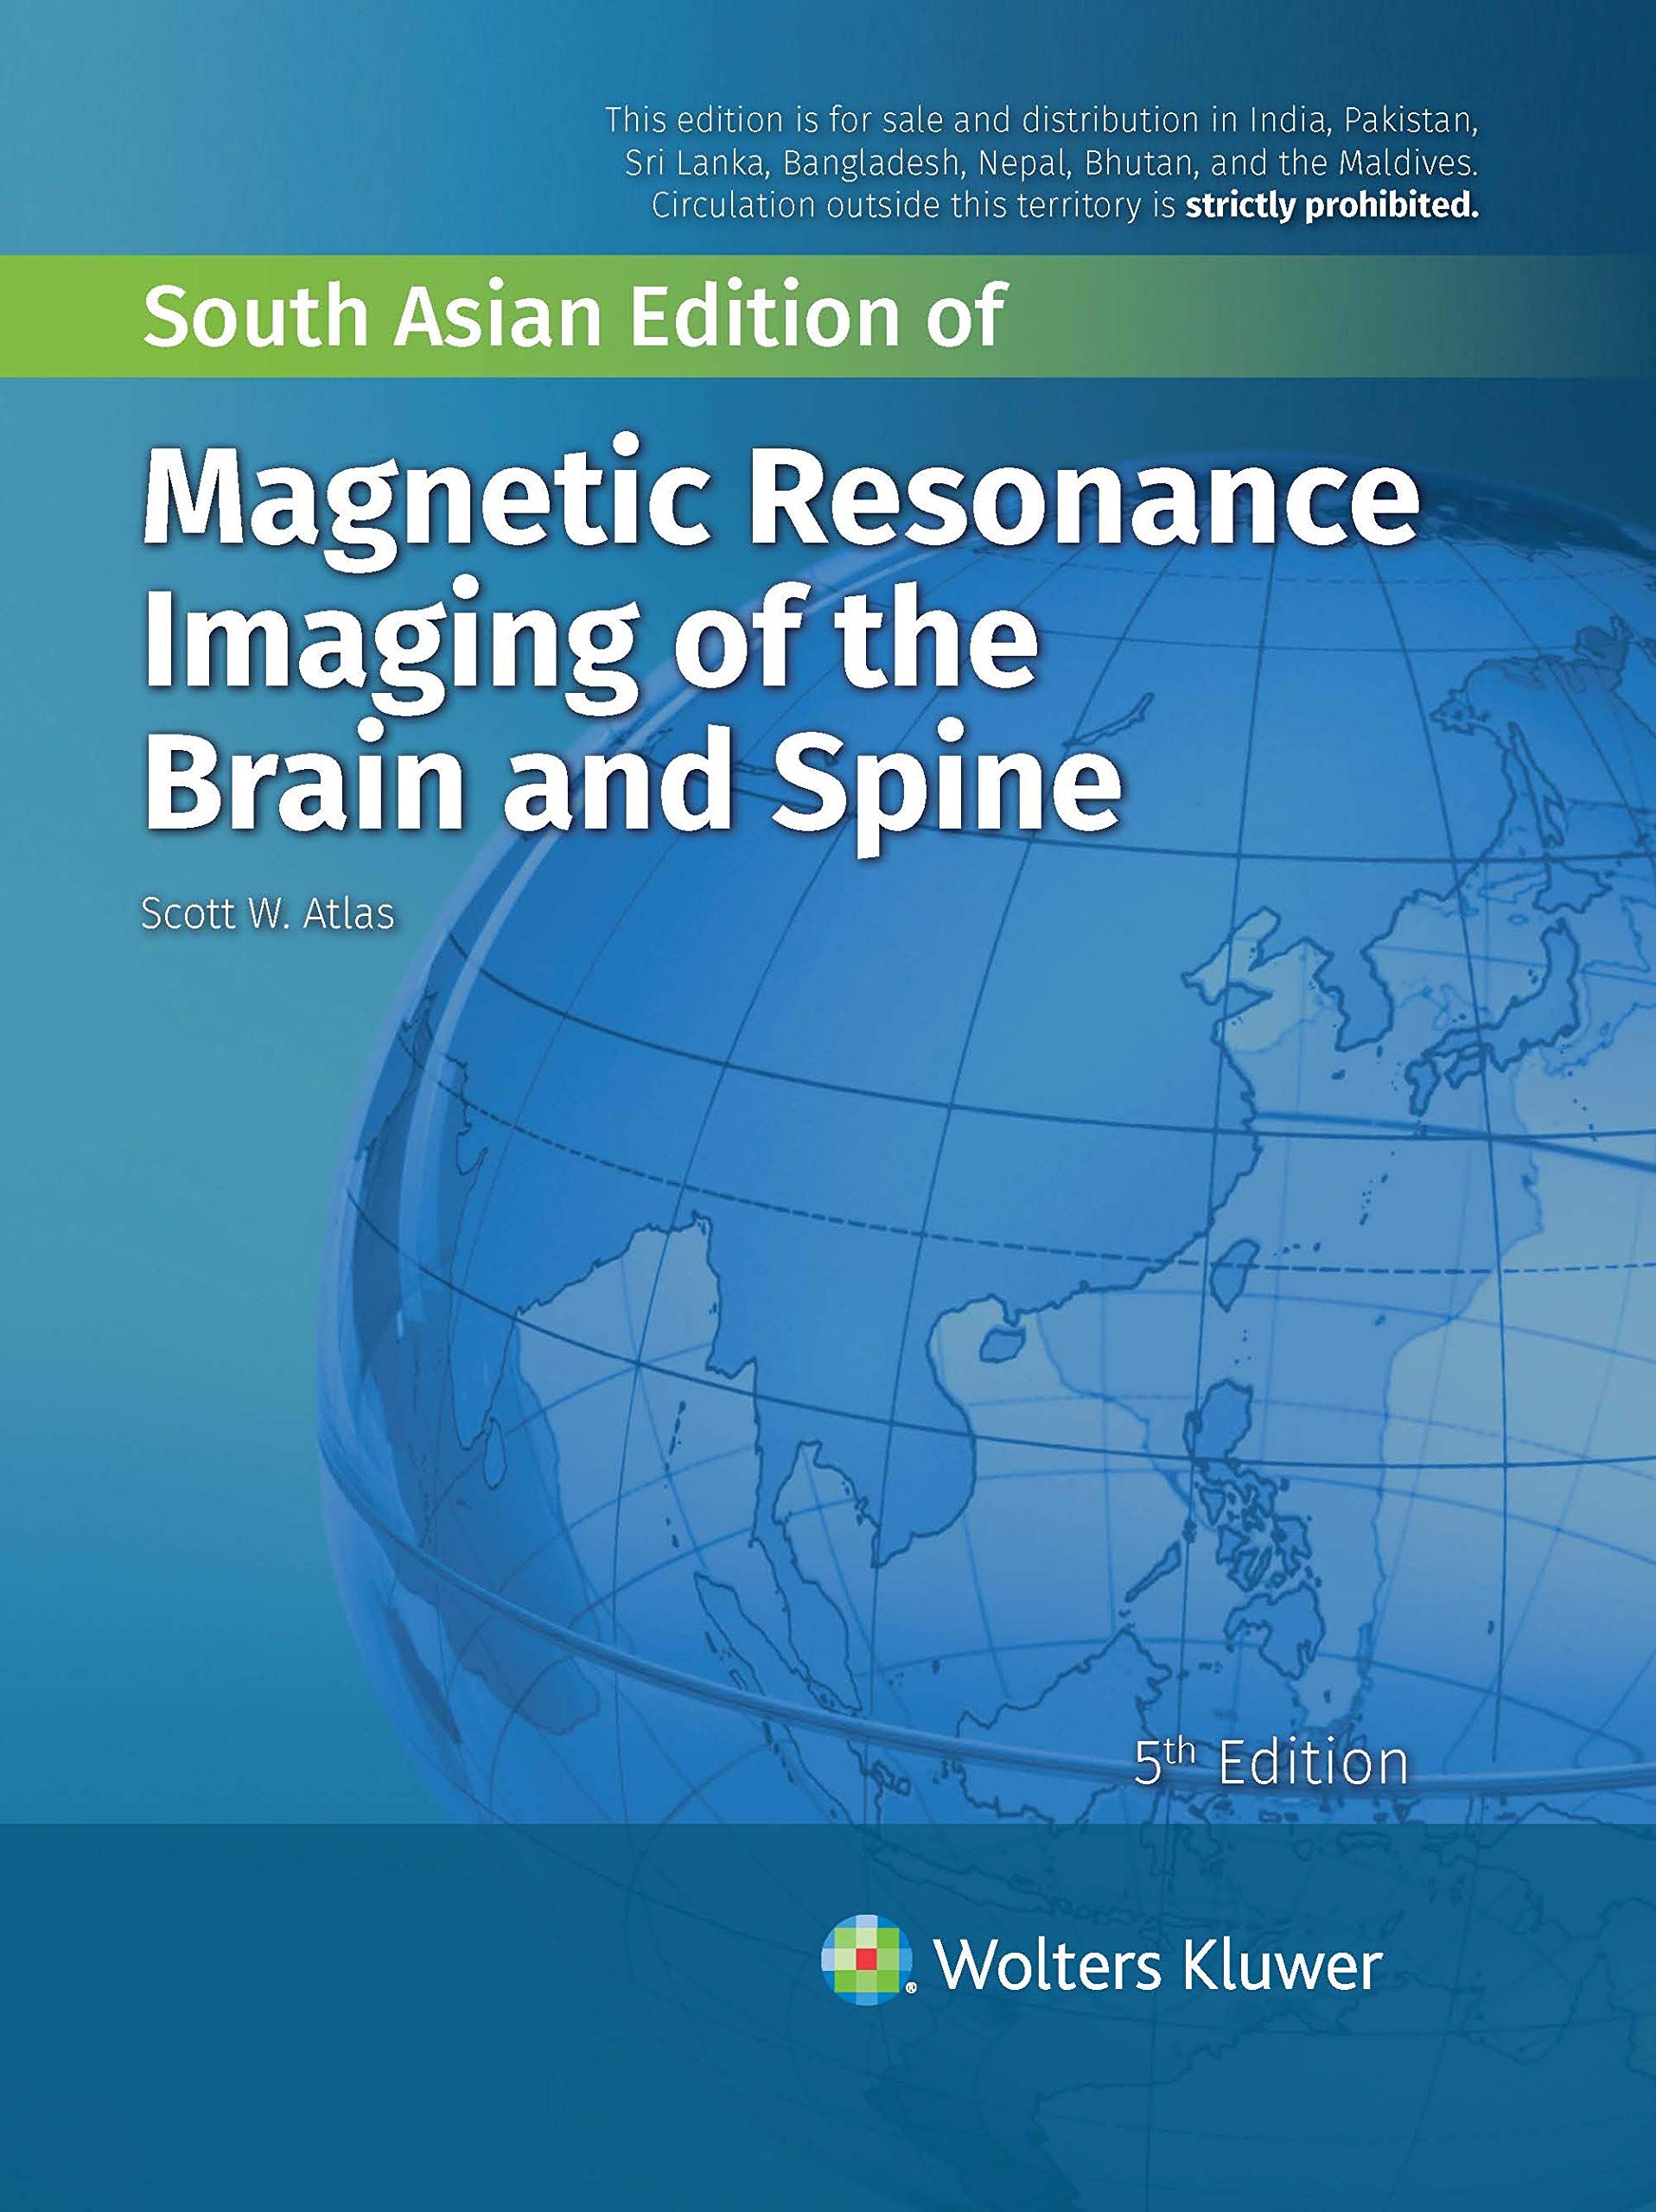 
magnetic-resonance-imaging-of-the-brain-and-spine-5th-south-asian-edition--9789390612178